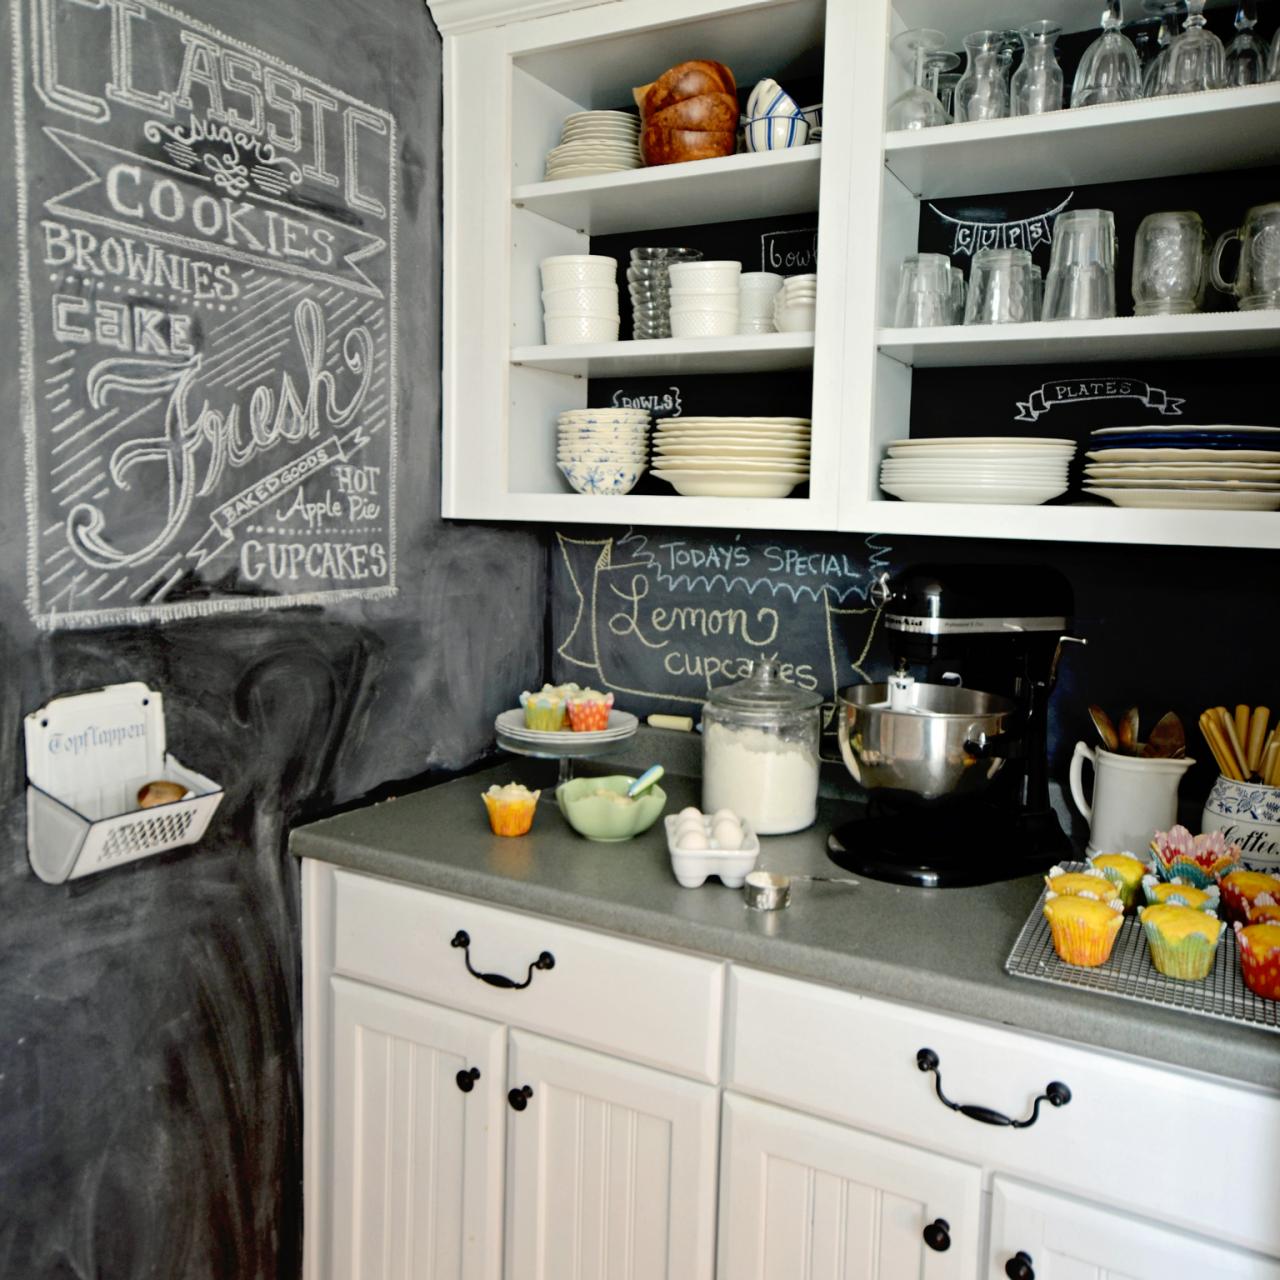 Does Chalkboard Paint for Walls Really Work? Painting Chaulkboard